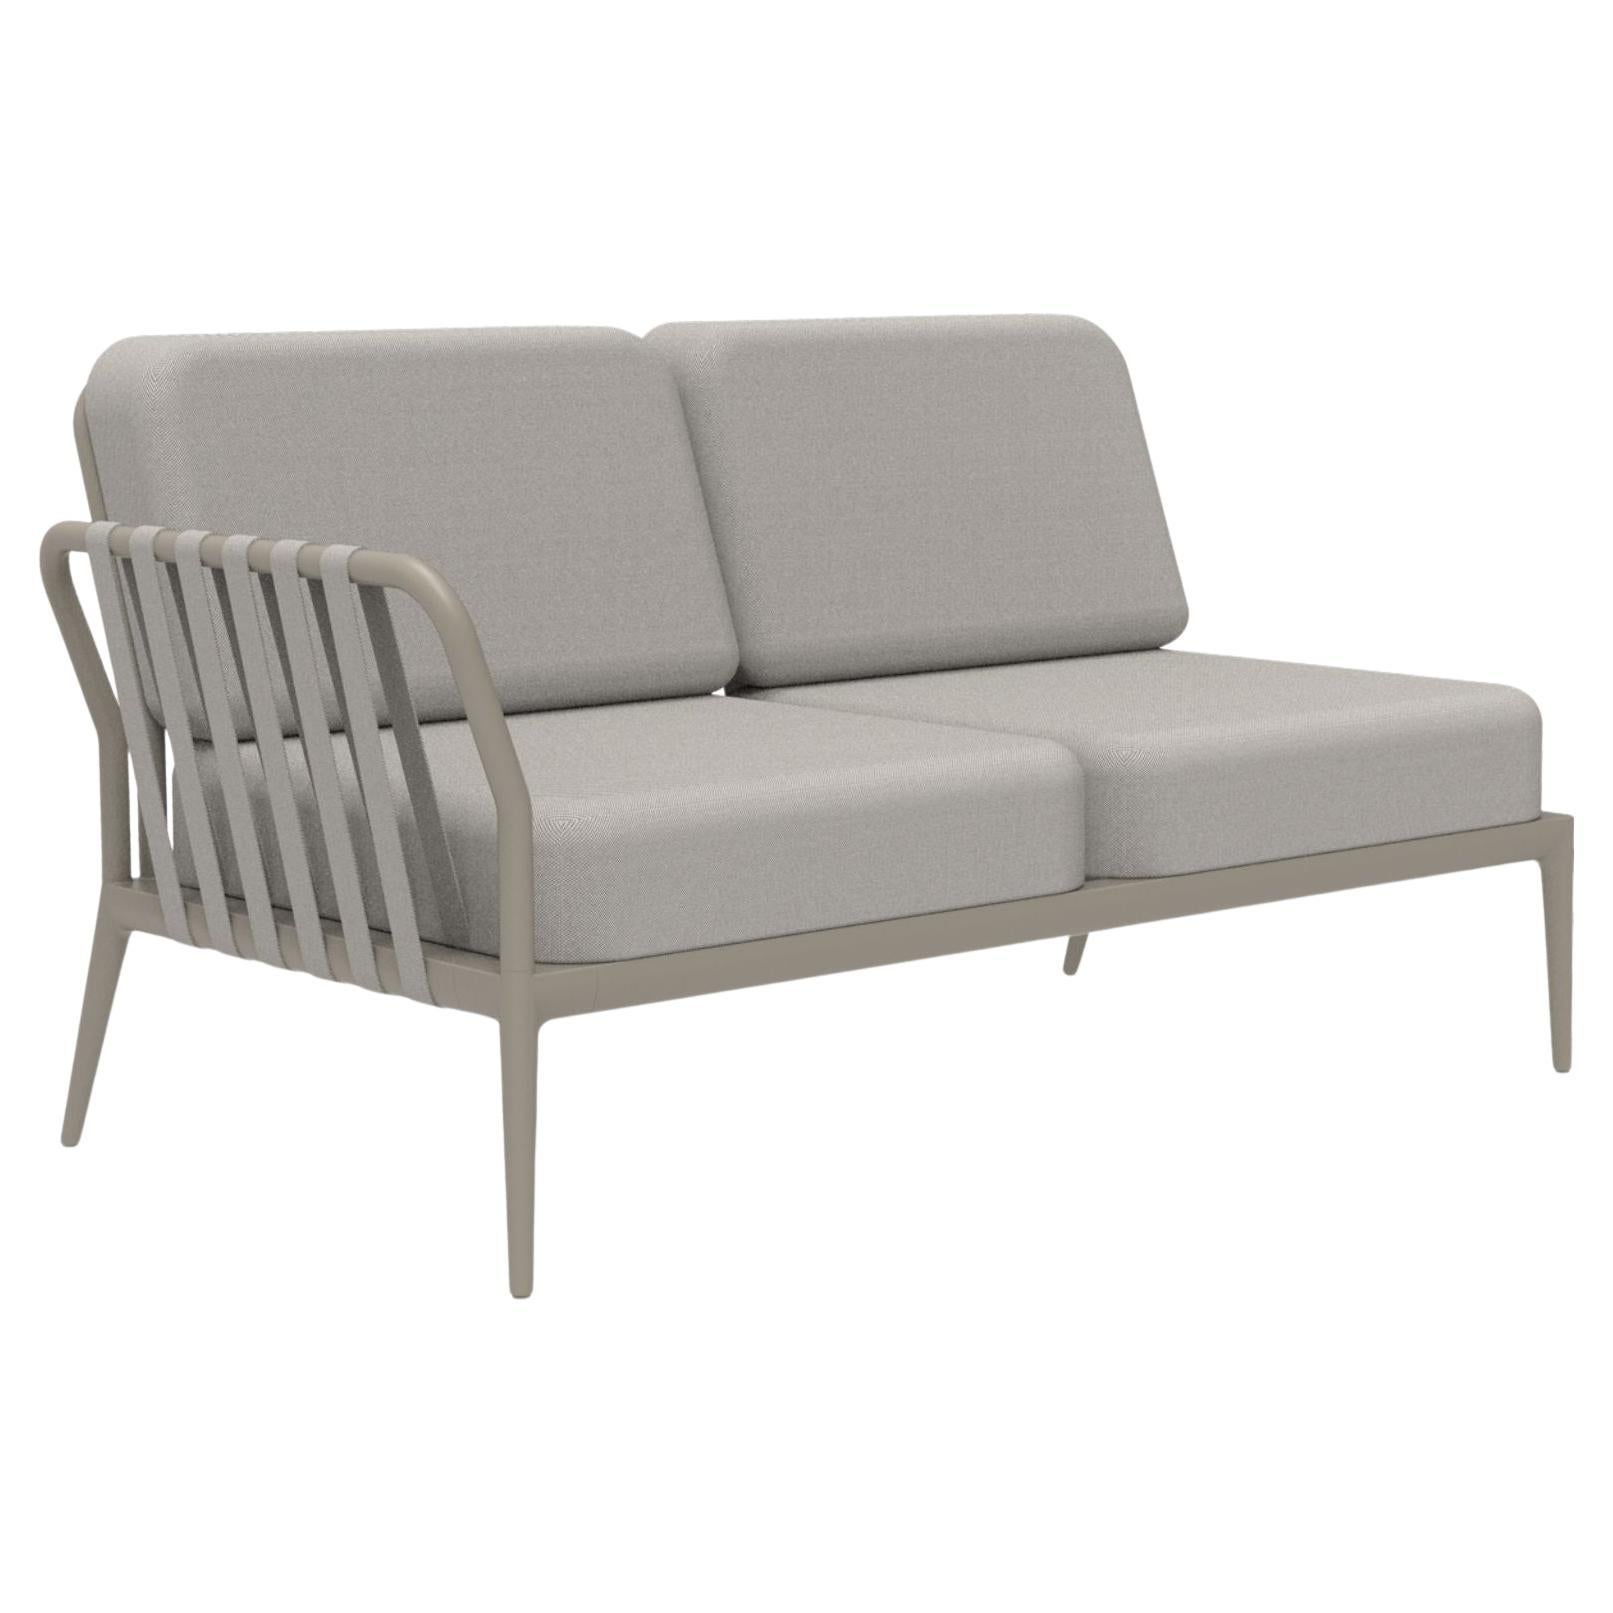 Ribbons Cream Double Right Modular Sofa by Mowee